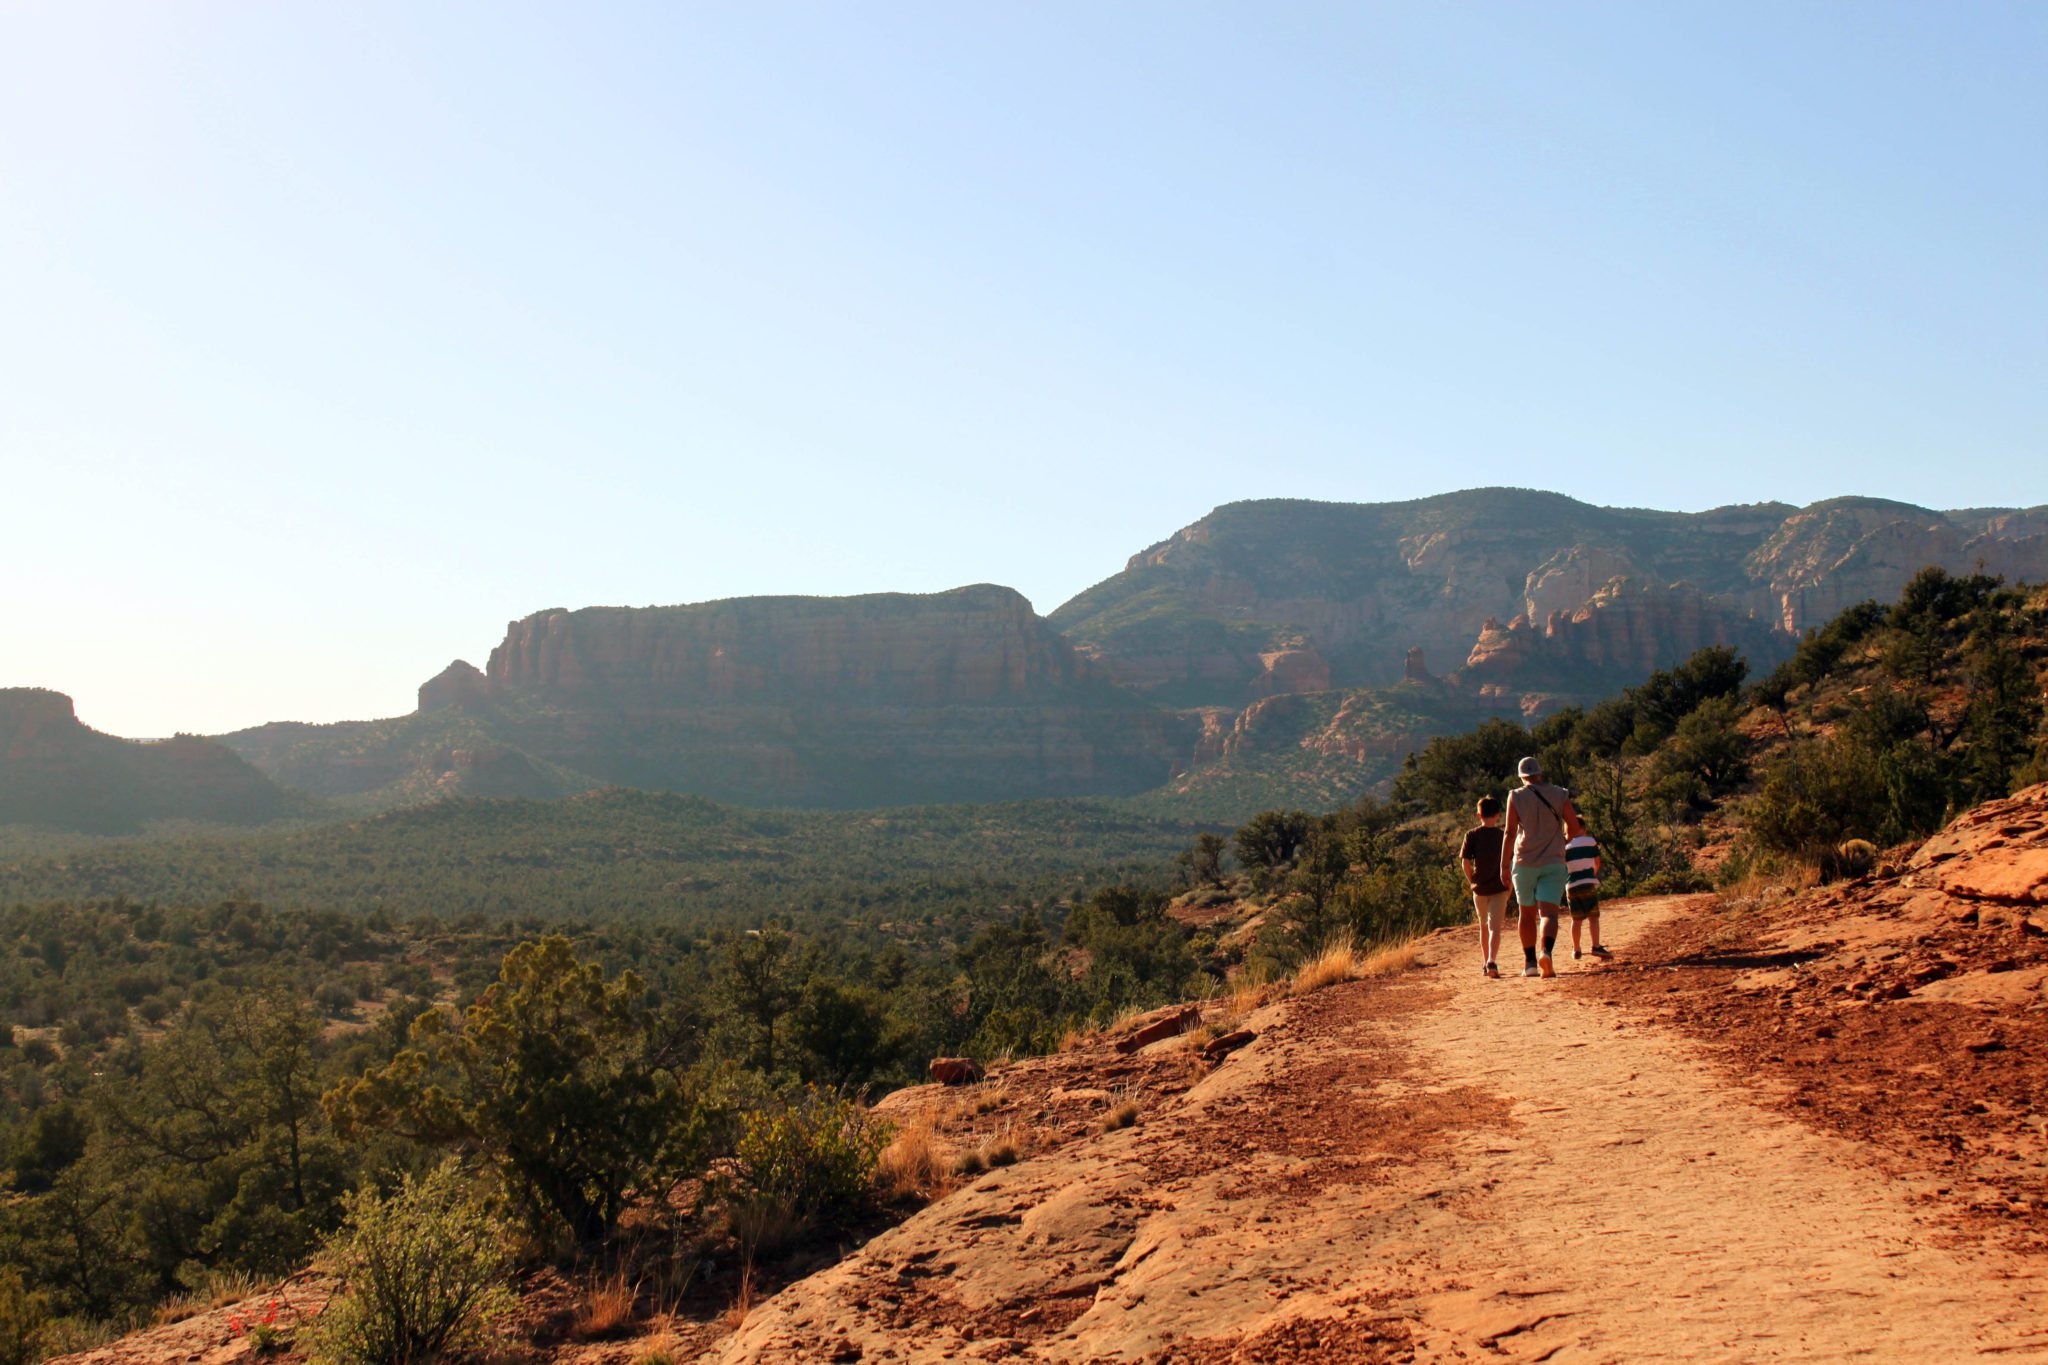 Devil's Bridge is one of the most beautiful hikes in Sedona and all of Arizona!- Best things to do in Sedona #sedona #arizona #devilsbridge